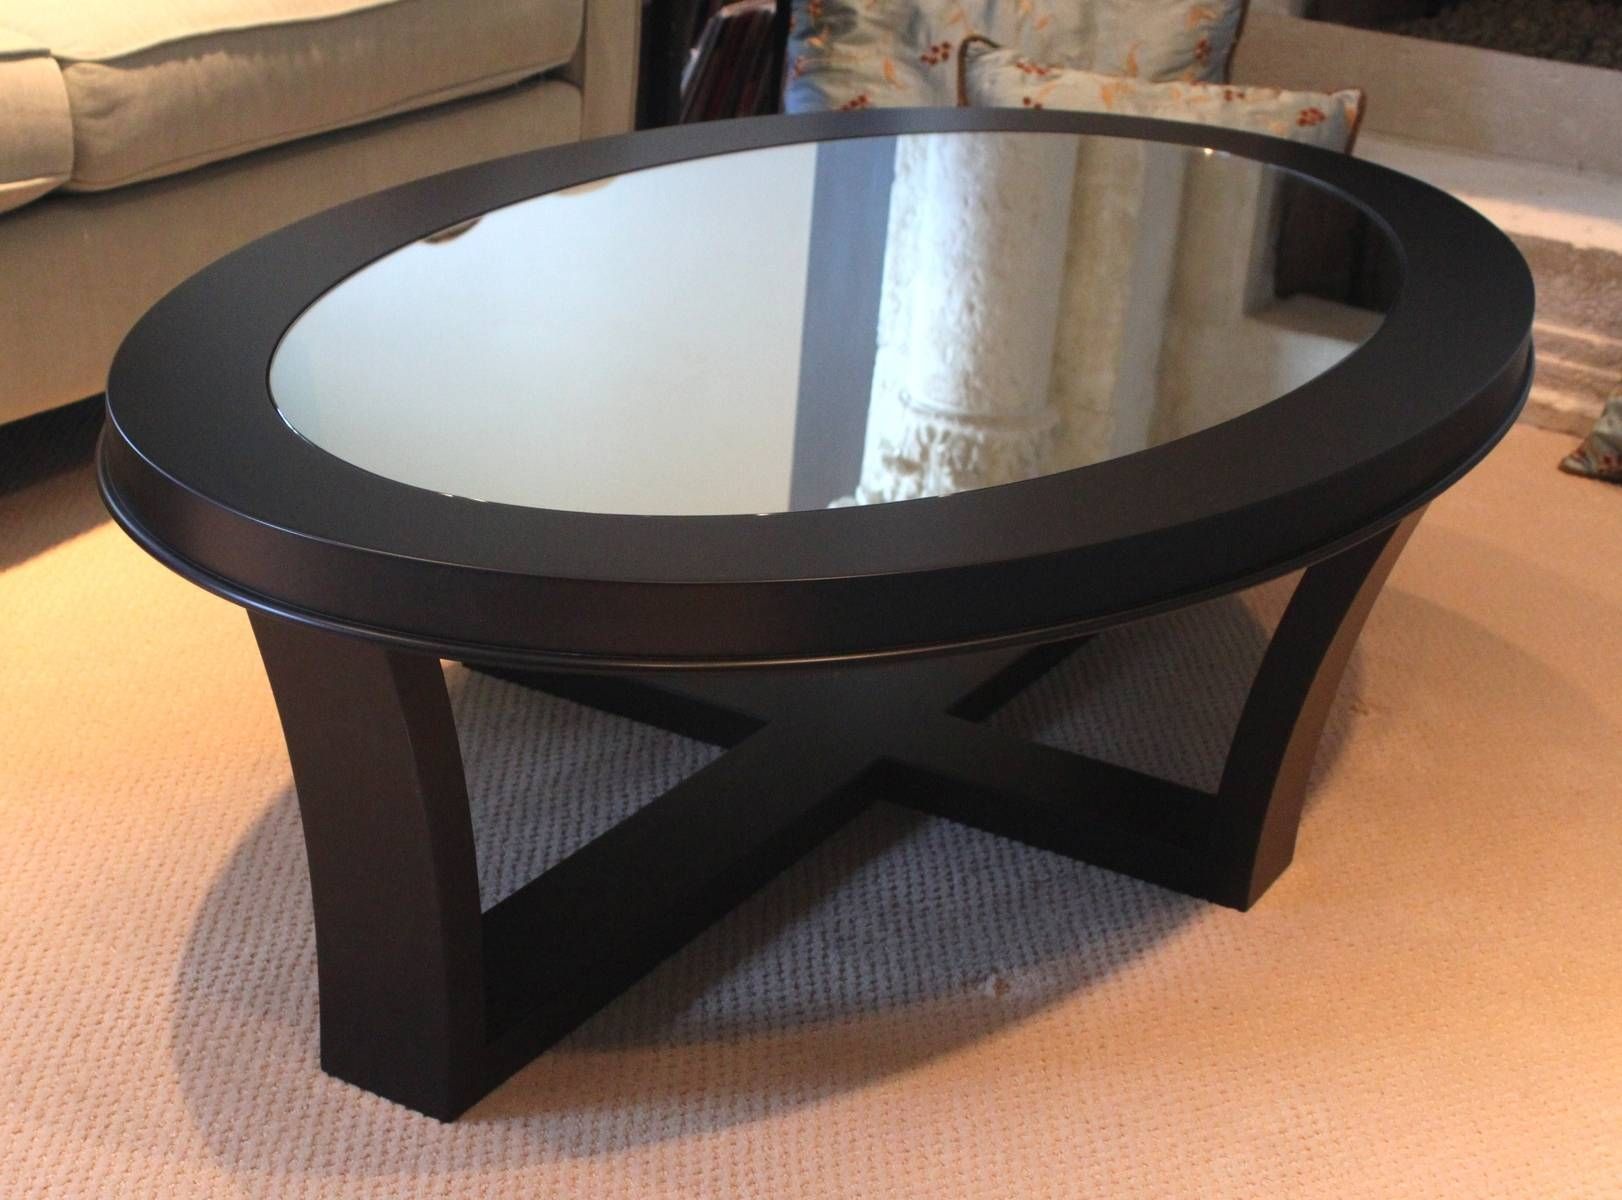 Black Oval Coffee Table : Oval Coffee Table With Crystal Clear With Regard To Black Oval Coffee Tables (View 6 of 30)